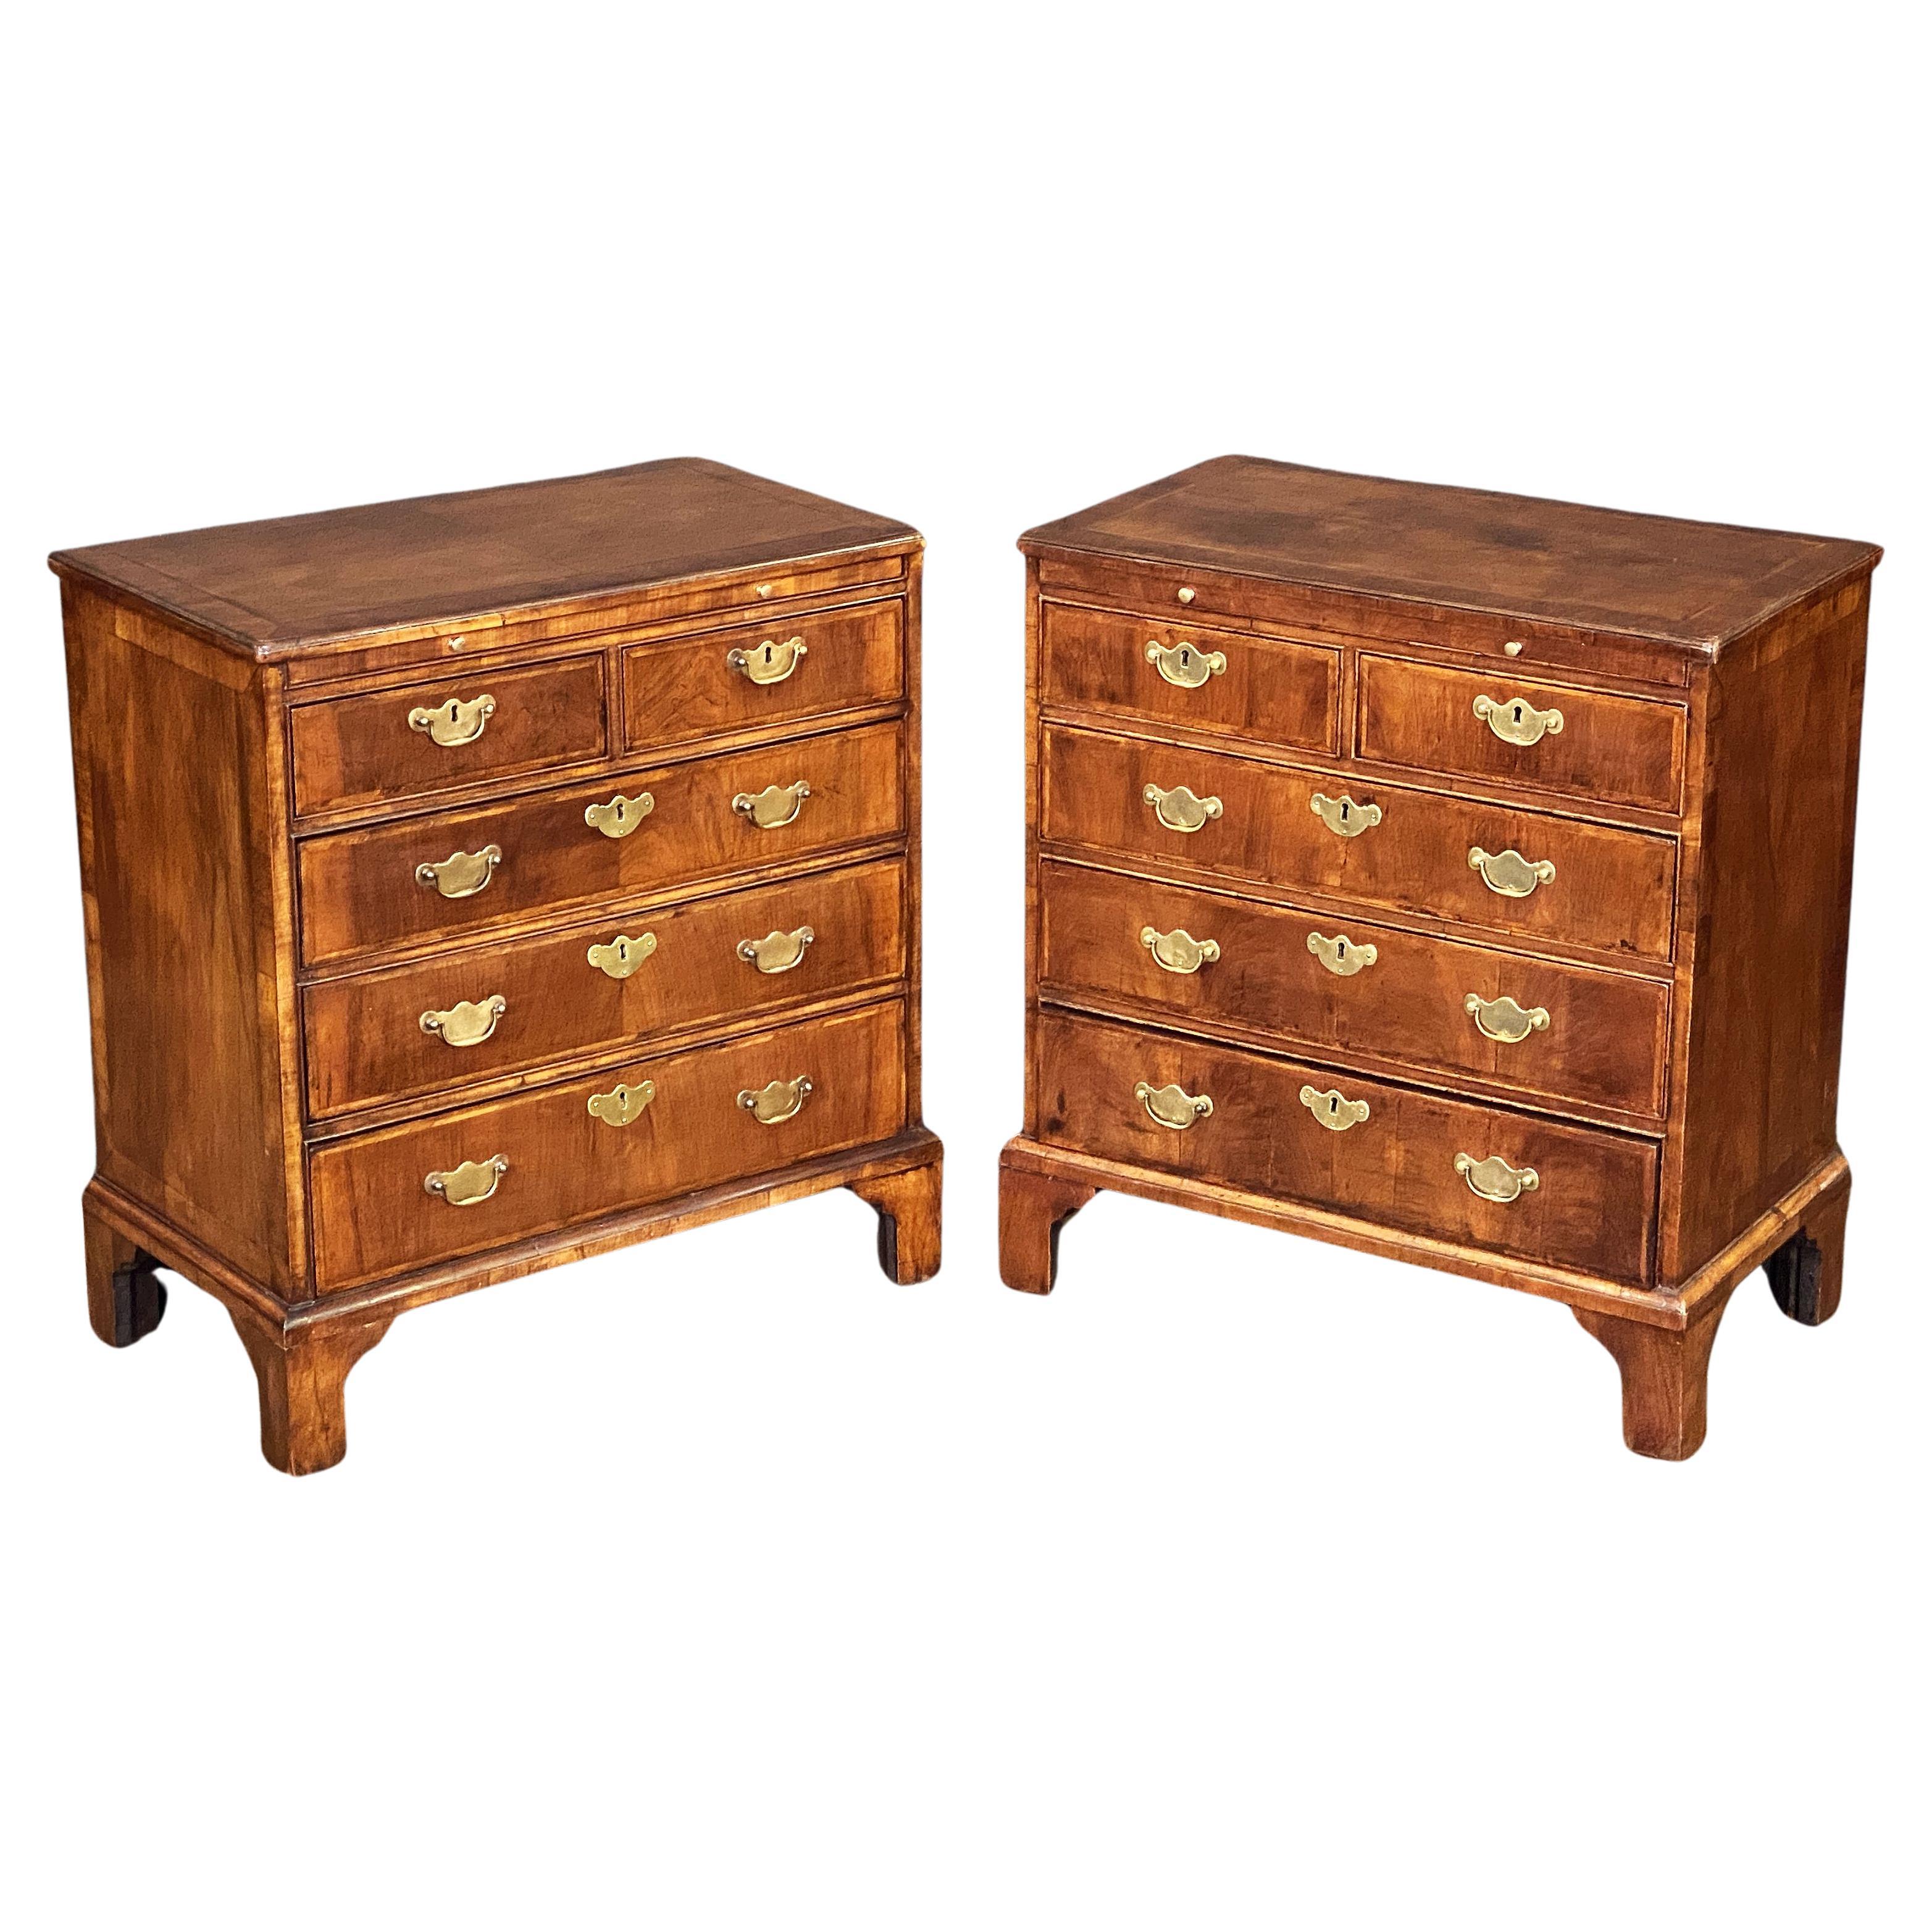 Pair of English Bachelor's Small Chests of Walnut